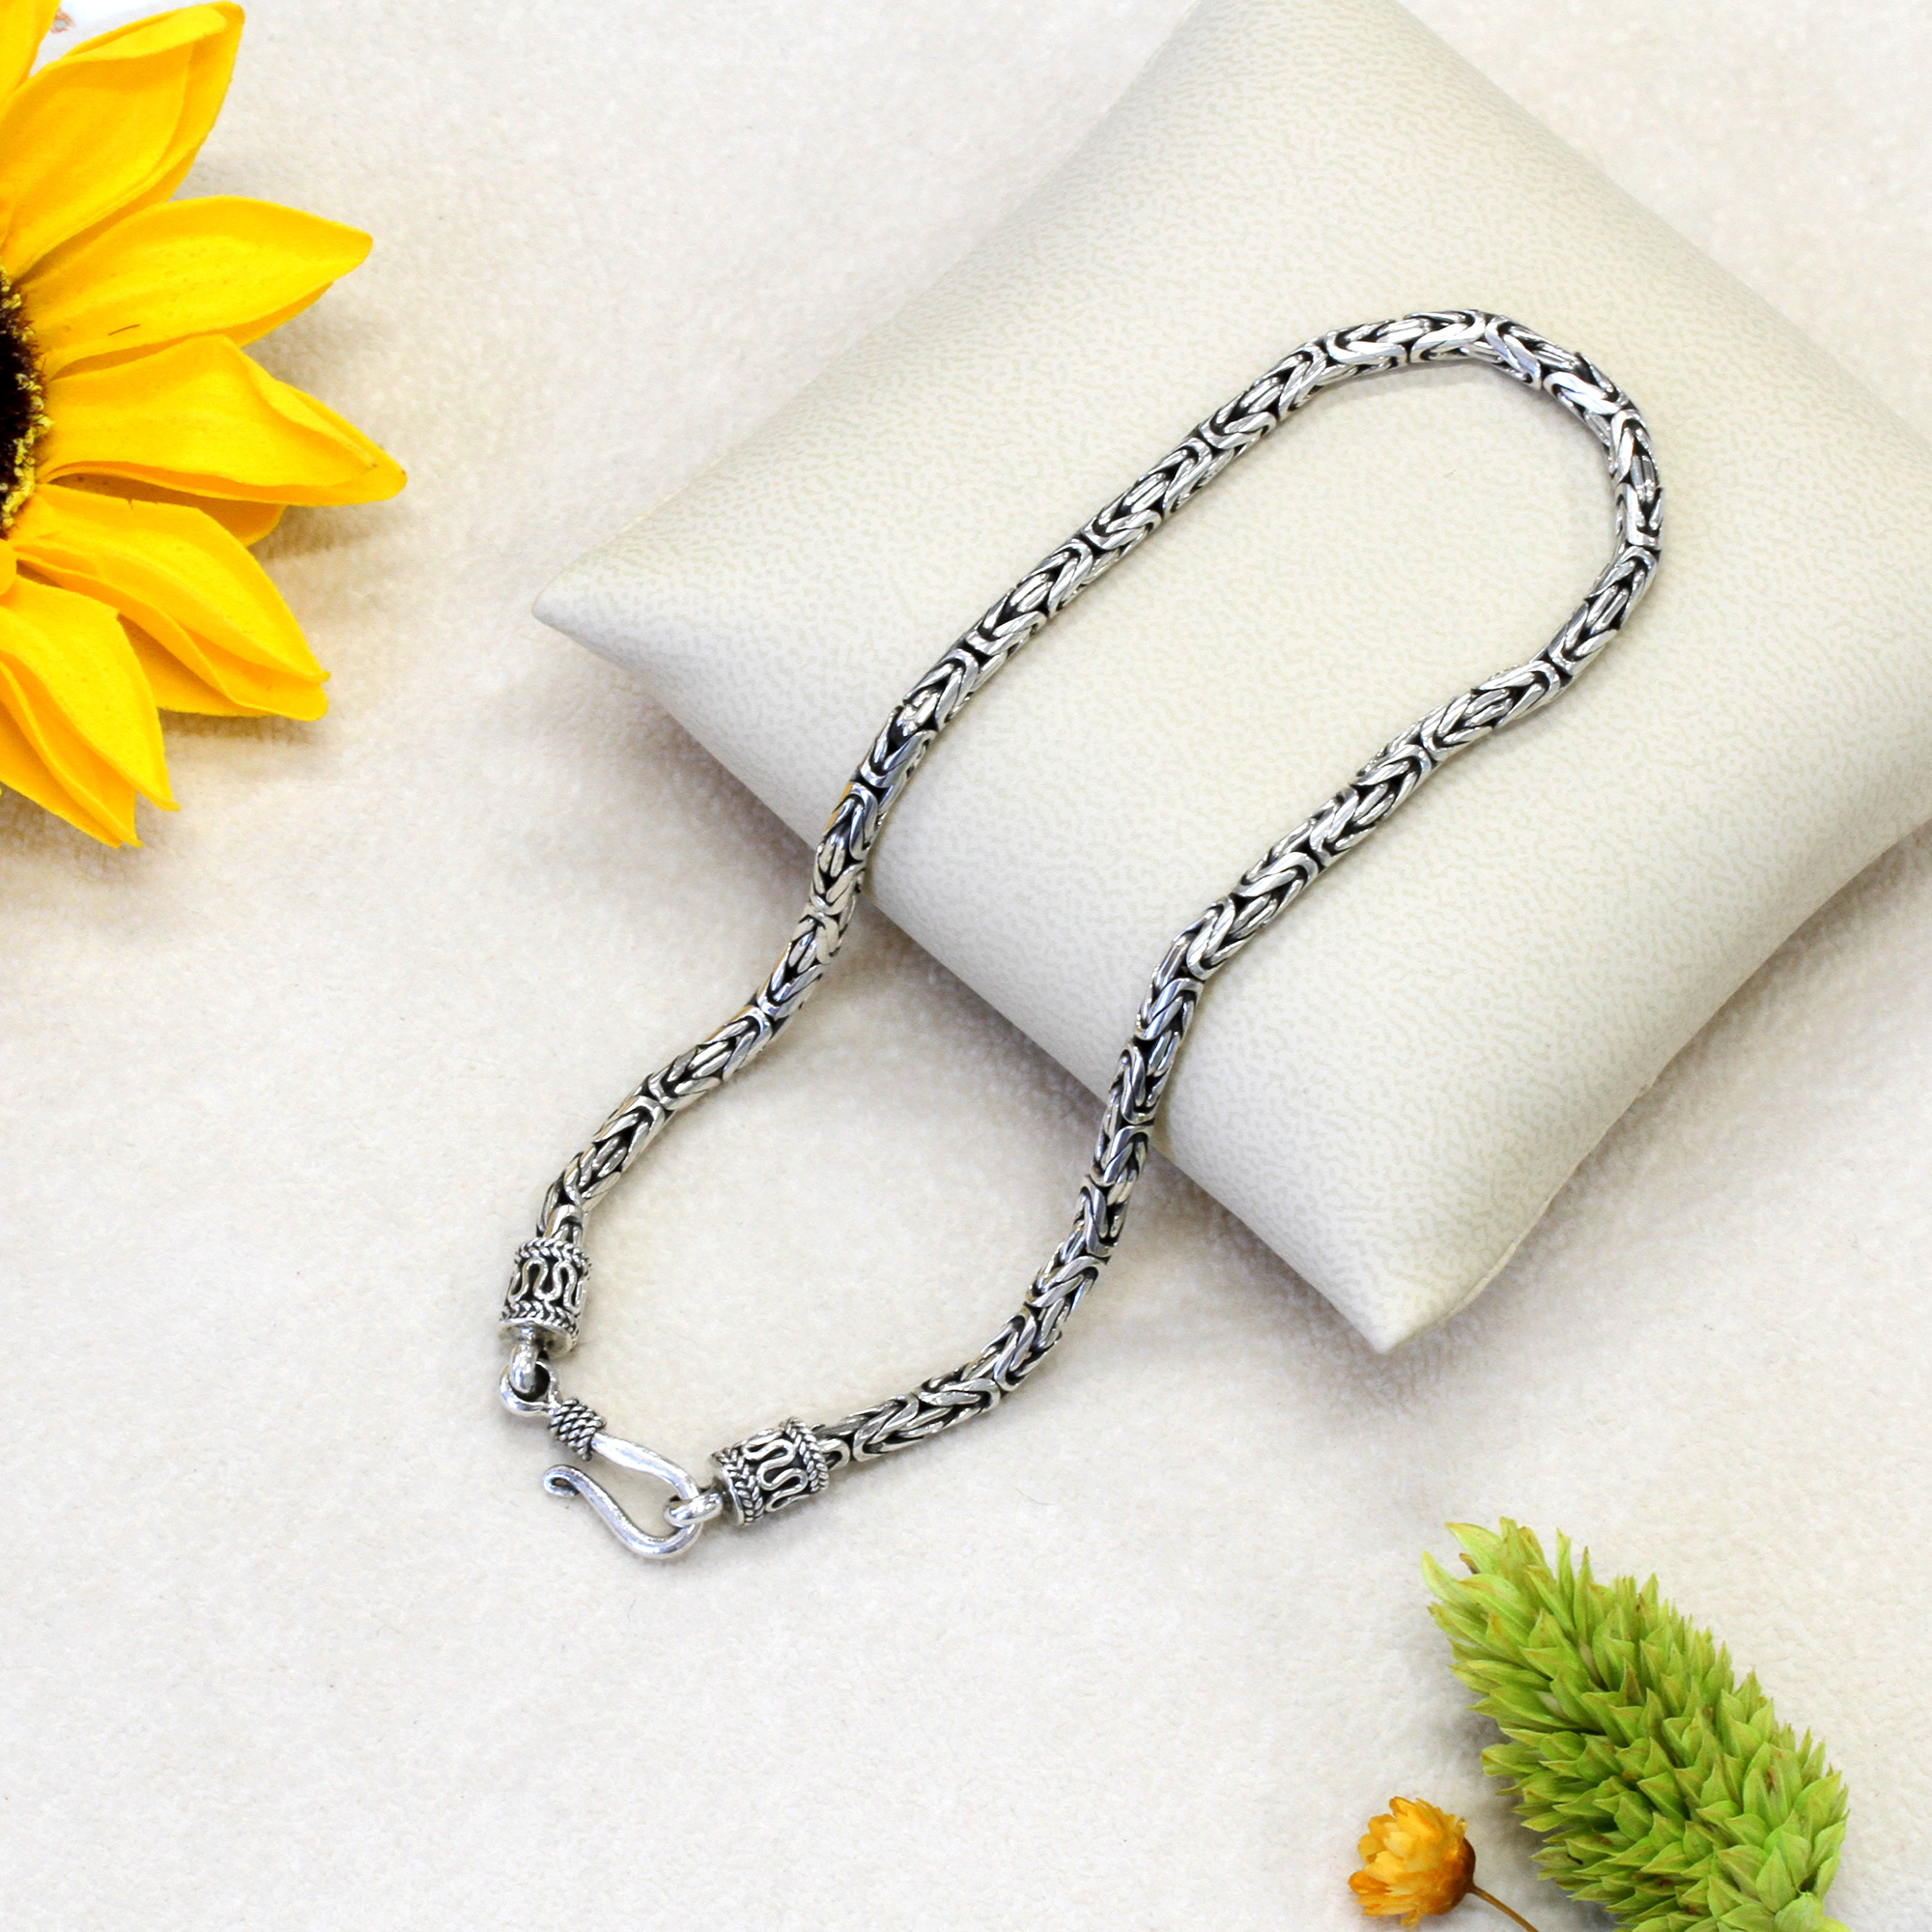 Pure 2.5mm 925 Sterling Silver Bali Byzantine Chain Necklace